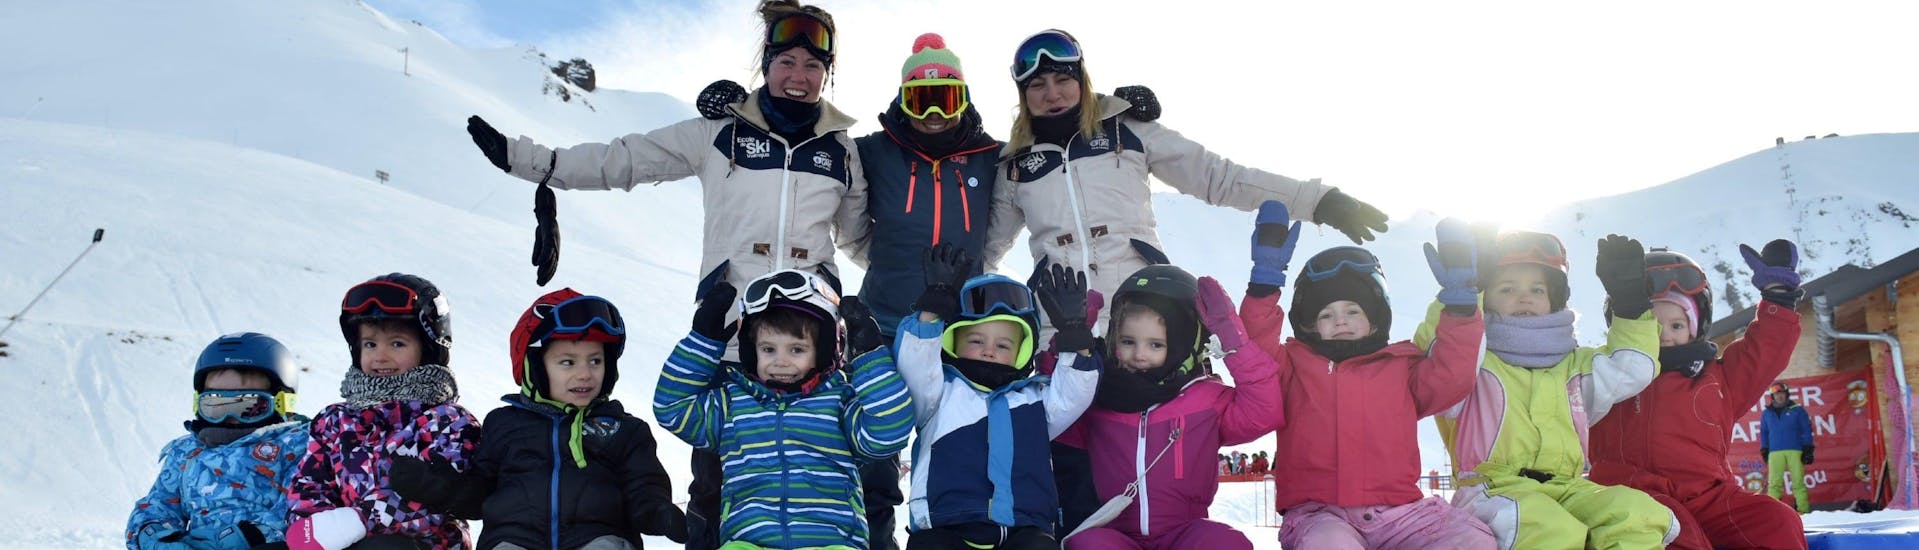 Kids are sitting with their ski instructors from the ski school ESI Valfréjus in the middle of the kindergarten during their Kids Ski Lessons "Kindergarten" (3-5 years).